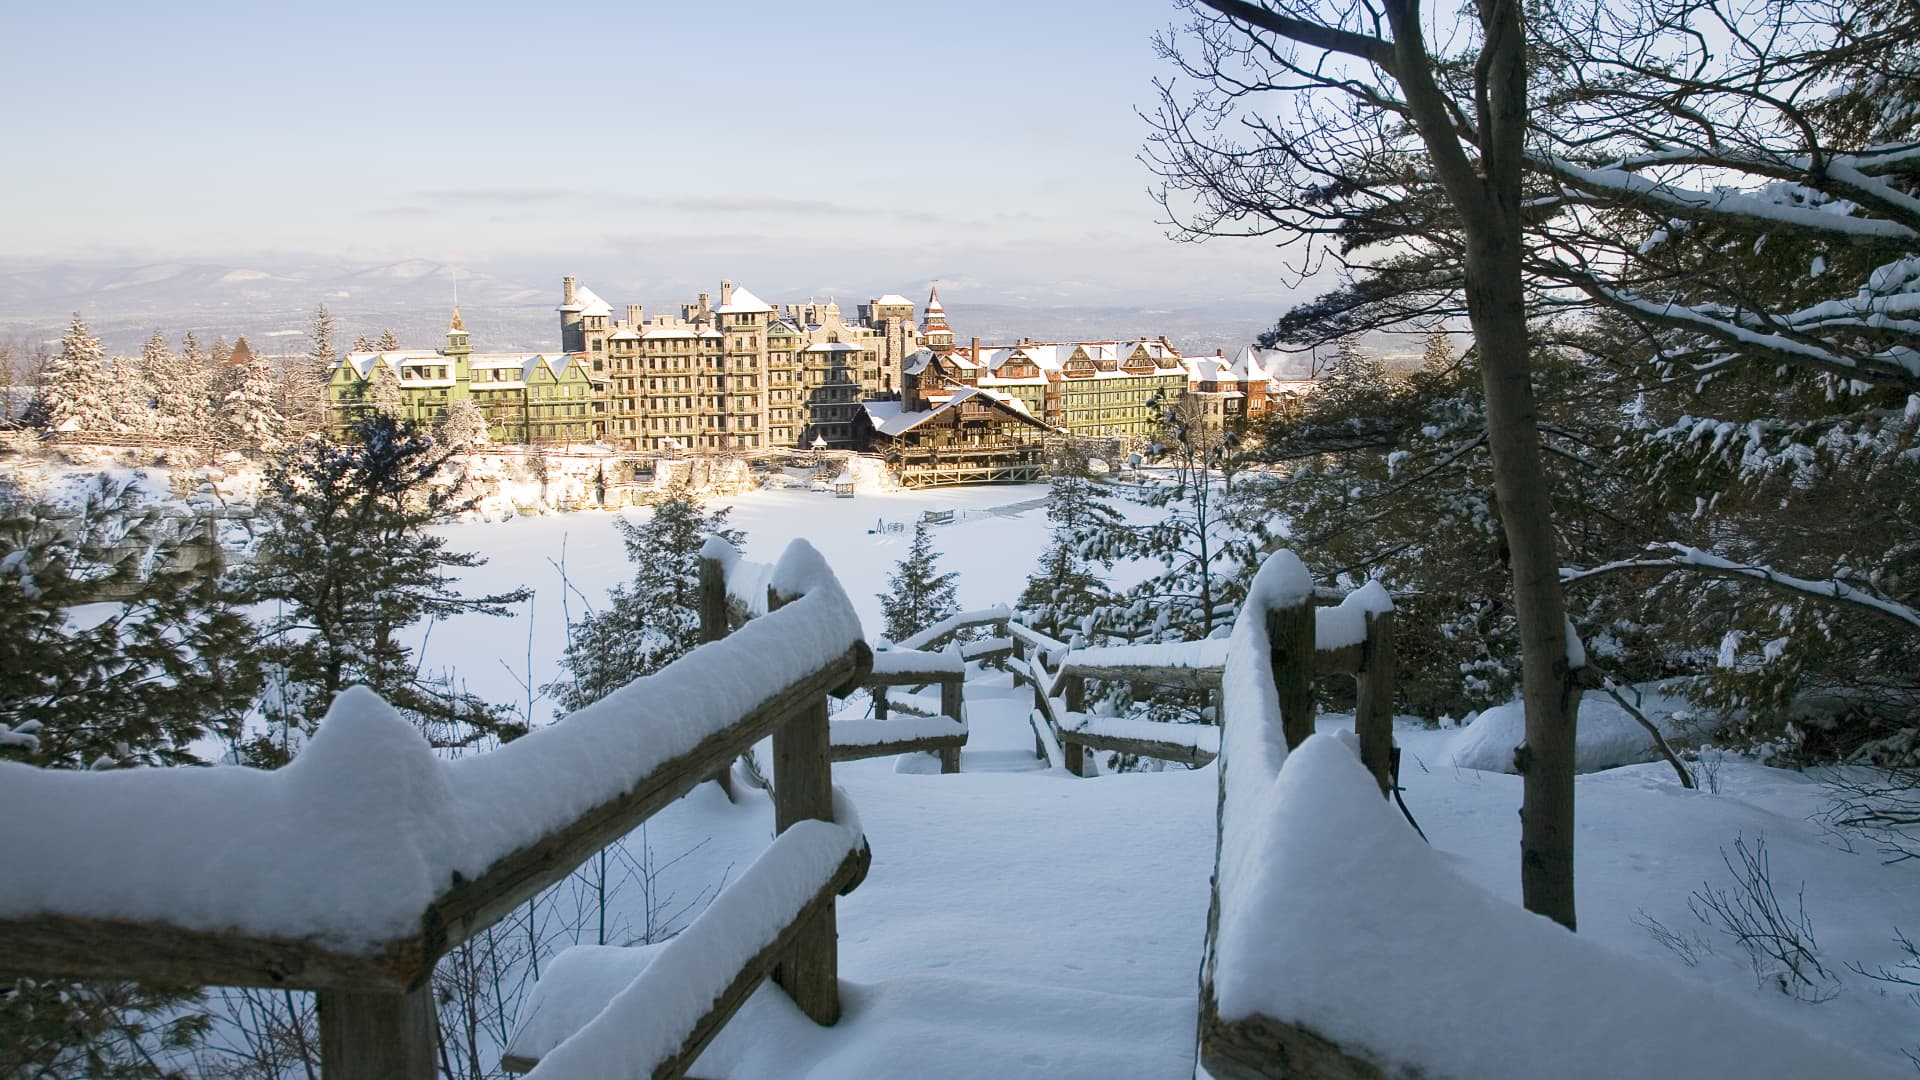 Mohonk Mountain House in New Paltz, New York released its Christmas schedule of holiday music, craft-making and ice skating in July.